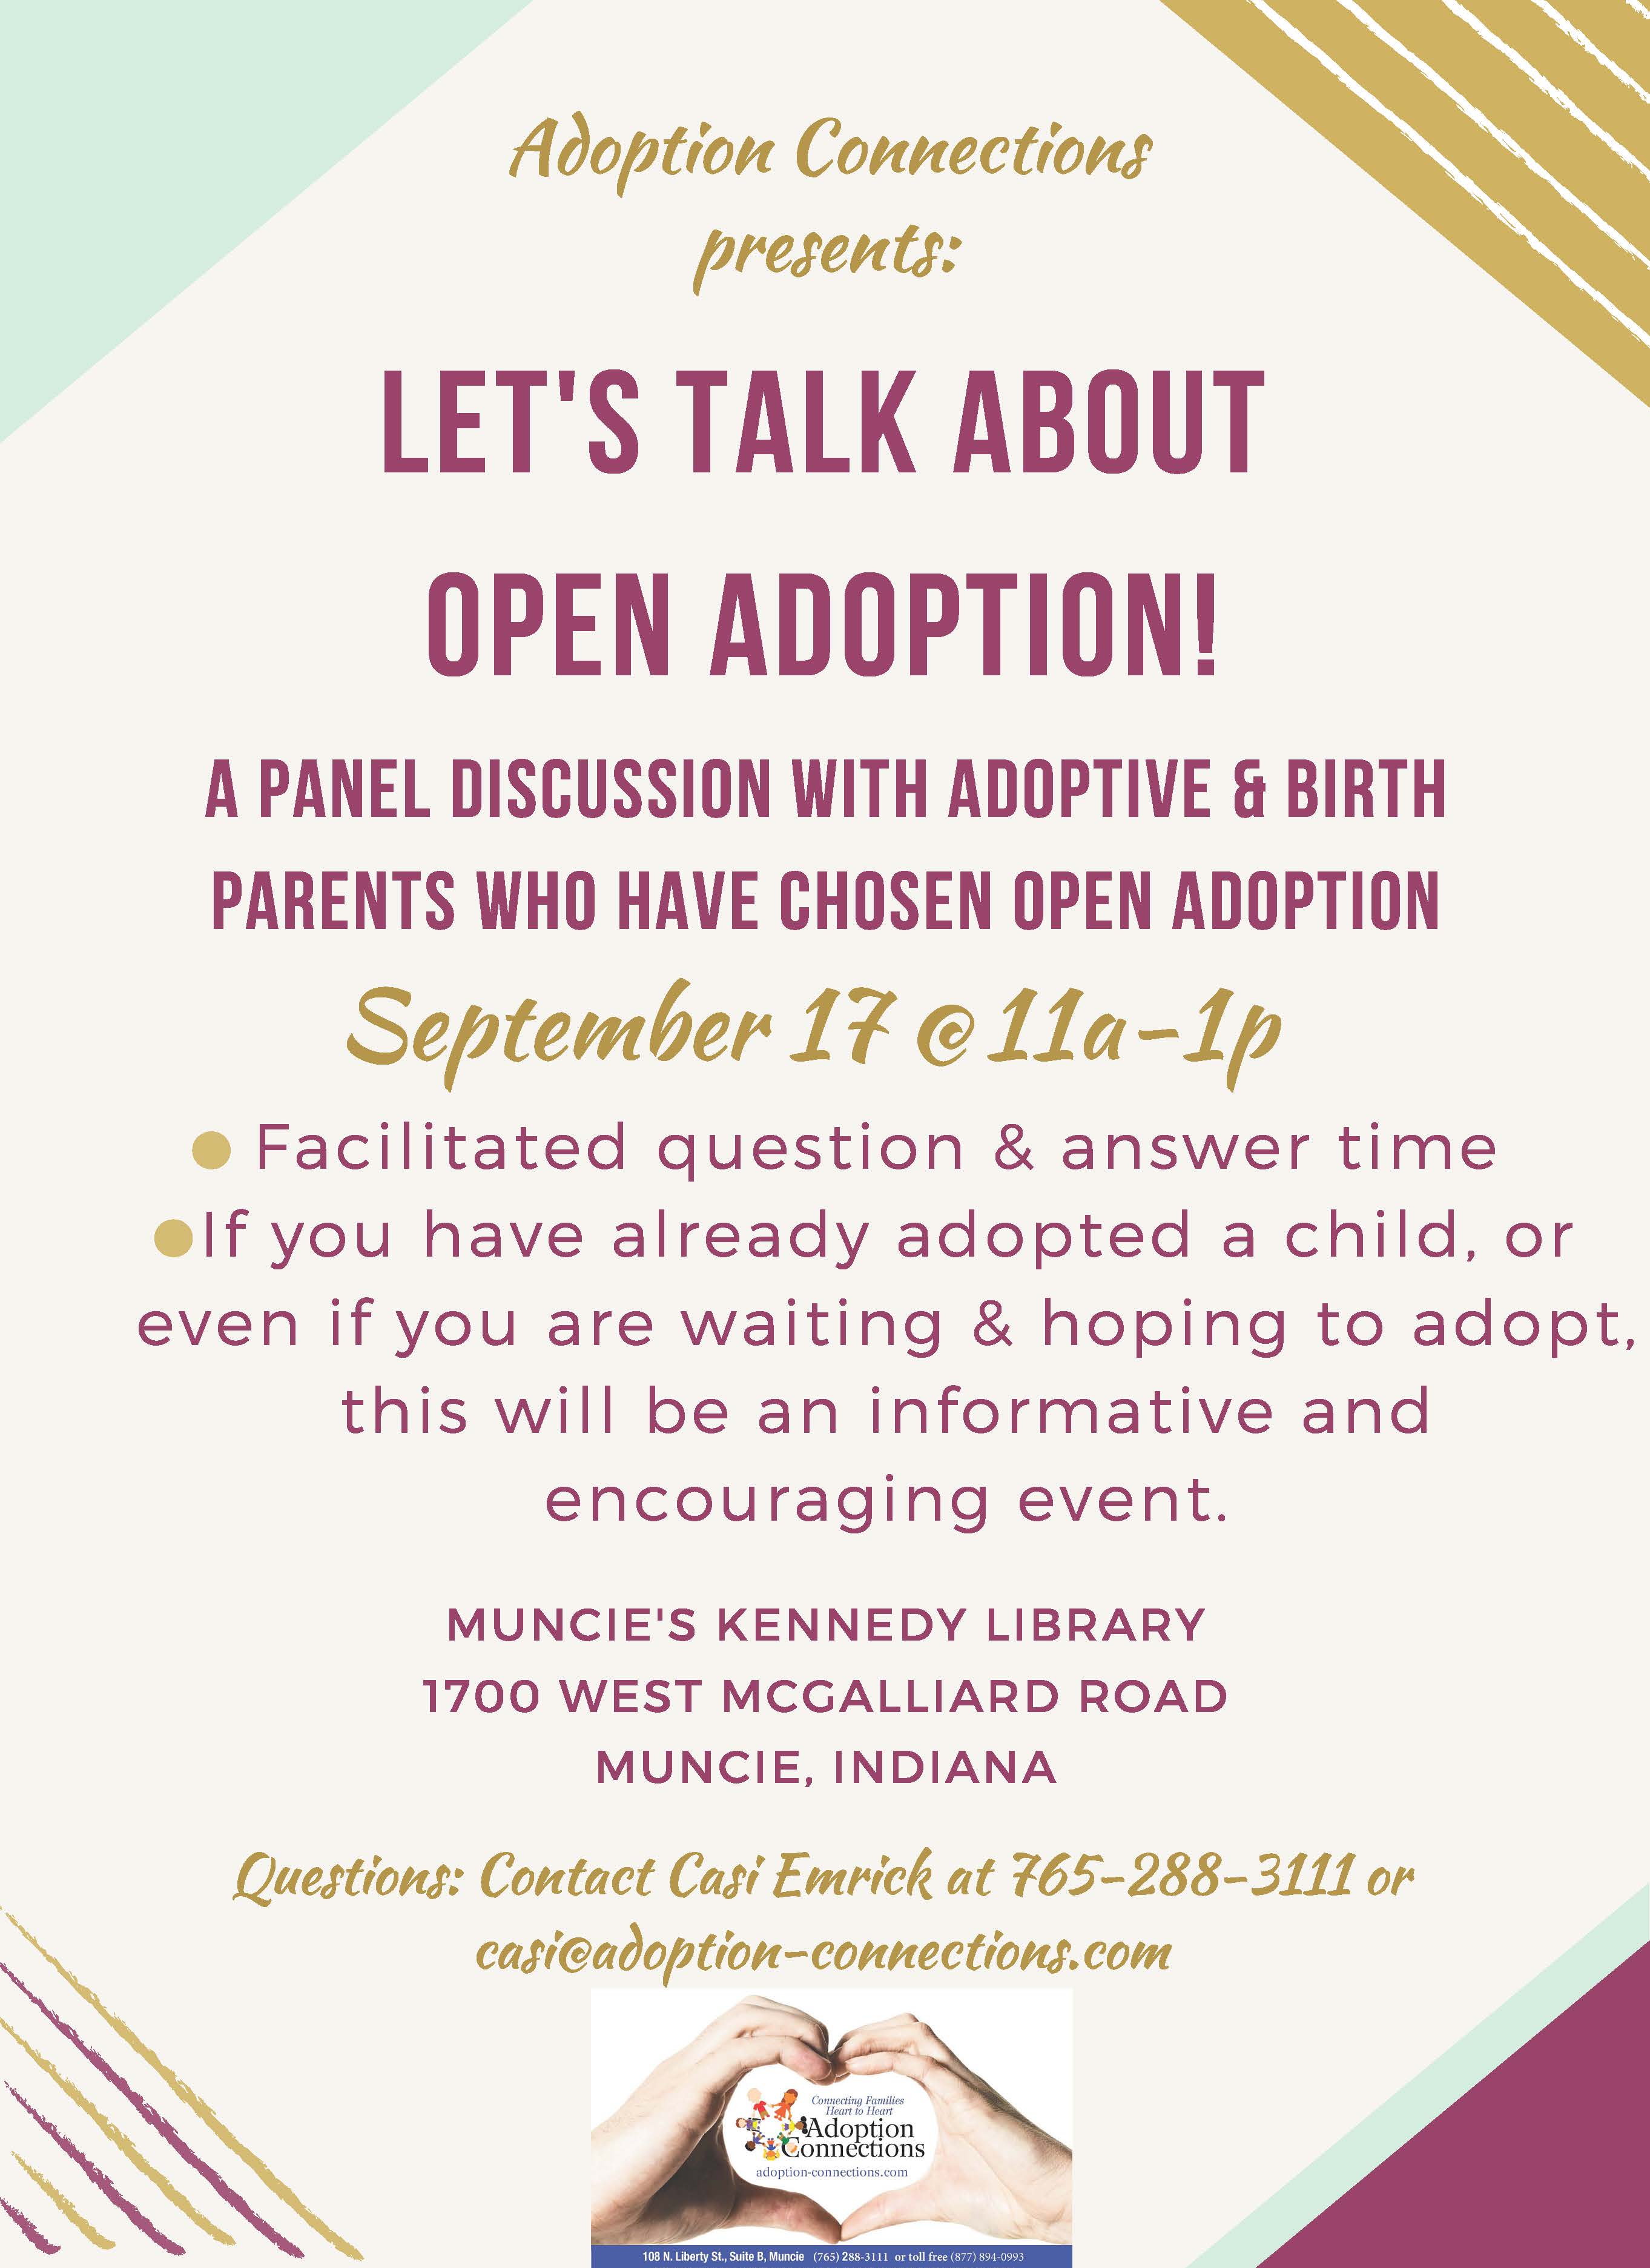 “Let’s Talk about Open Adoption!”  Workshop to be held on September 17th